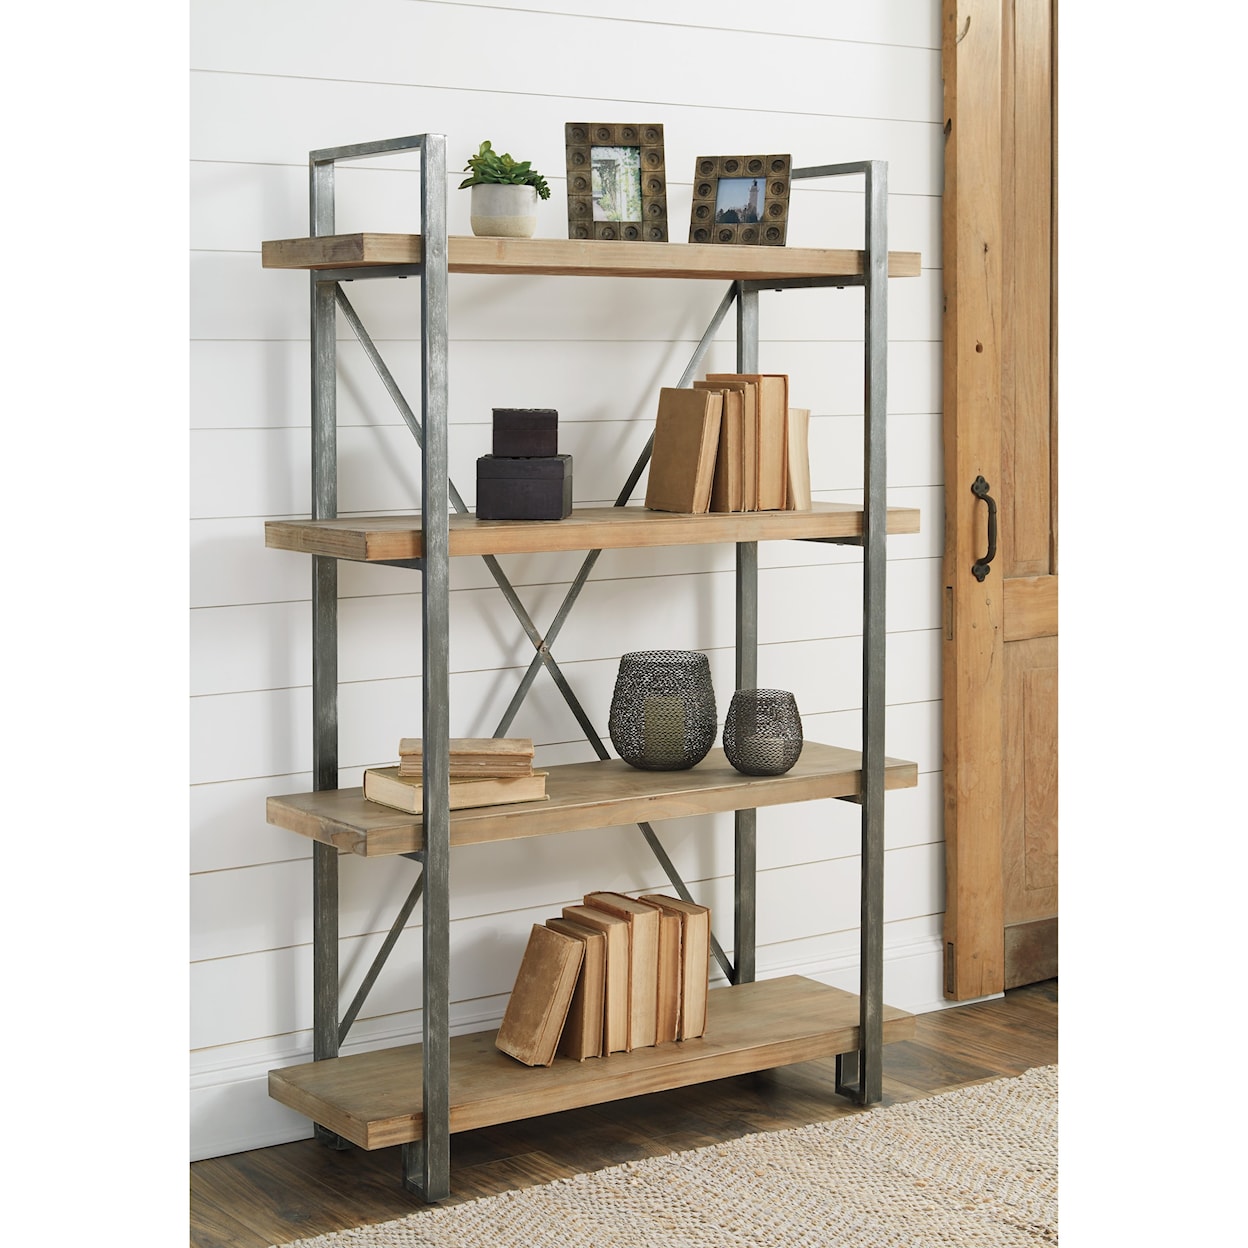 Signature Design by Ashley Furniture Forestmin Shelf